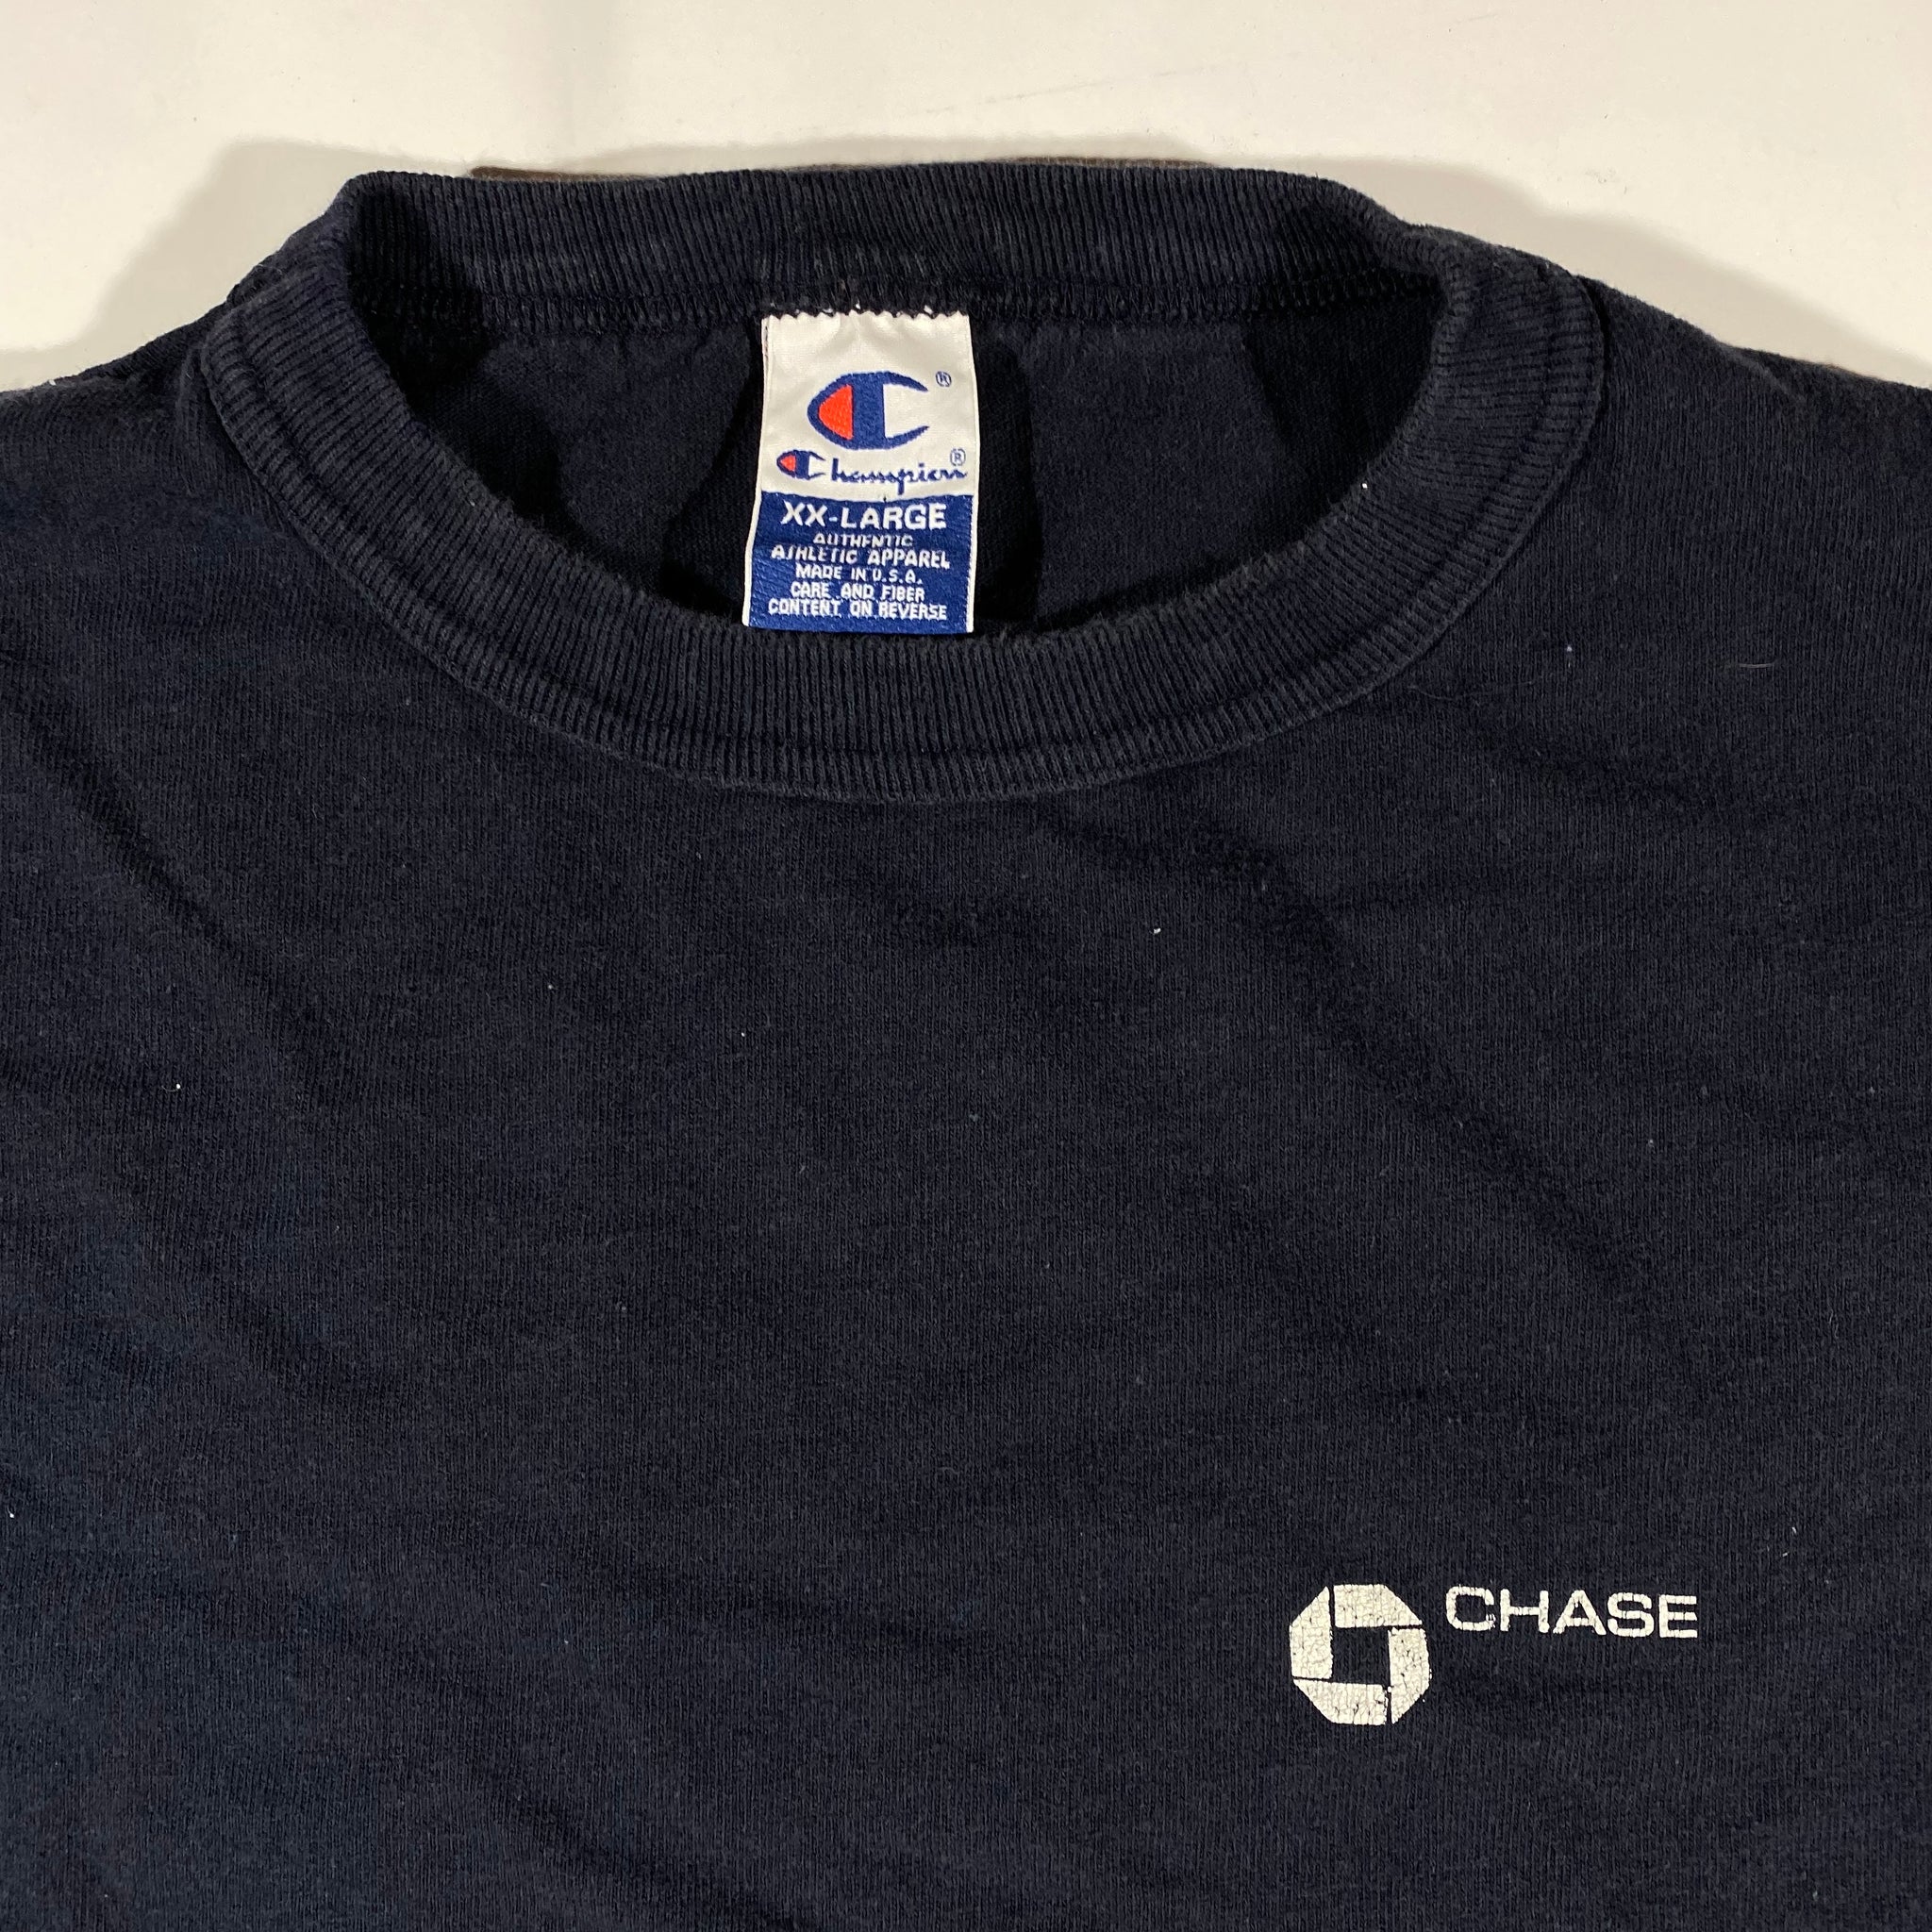 90s Chanpion chase bank tee XL fit